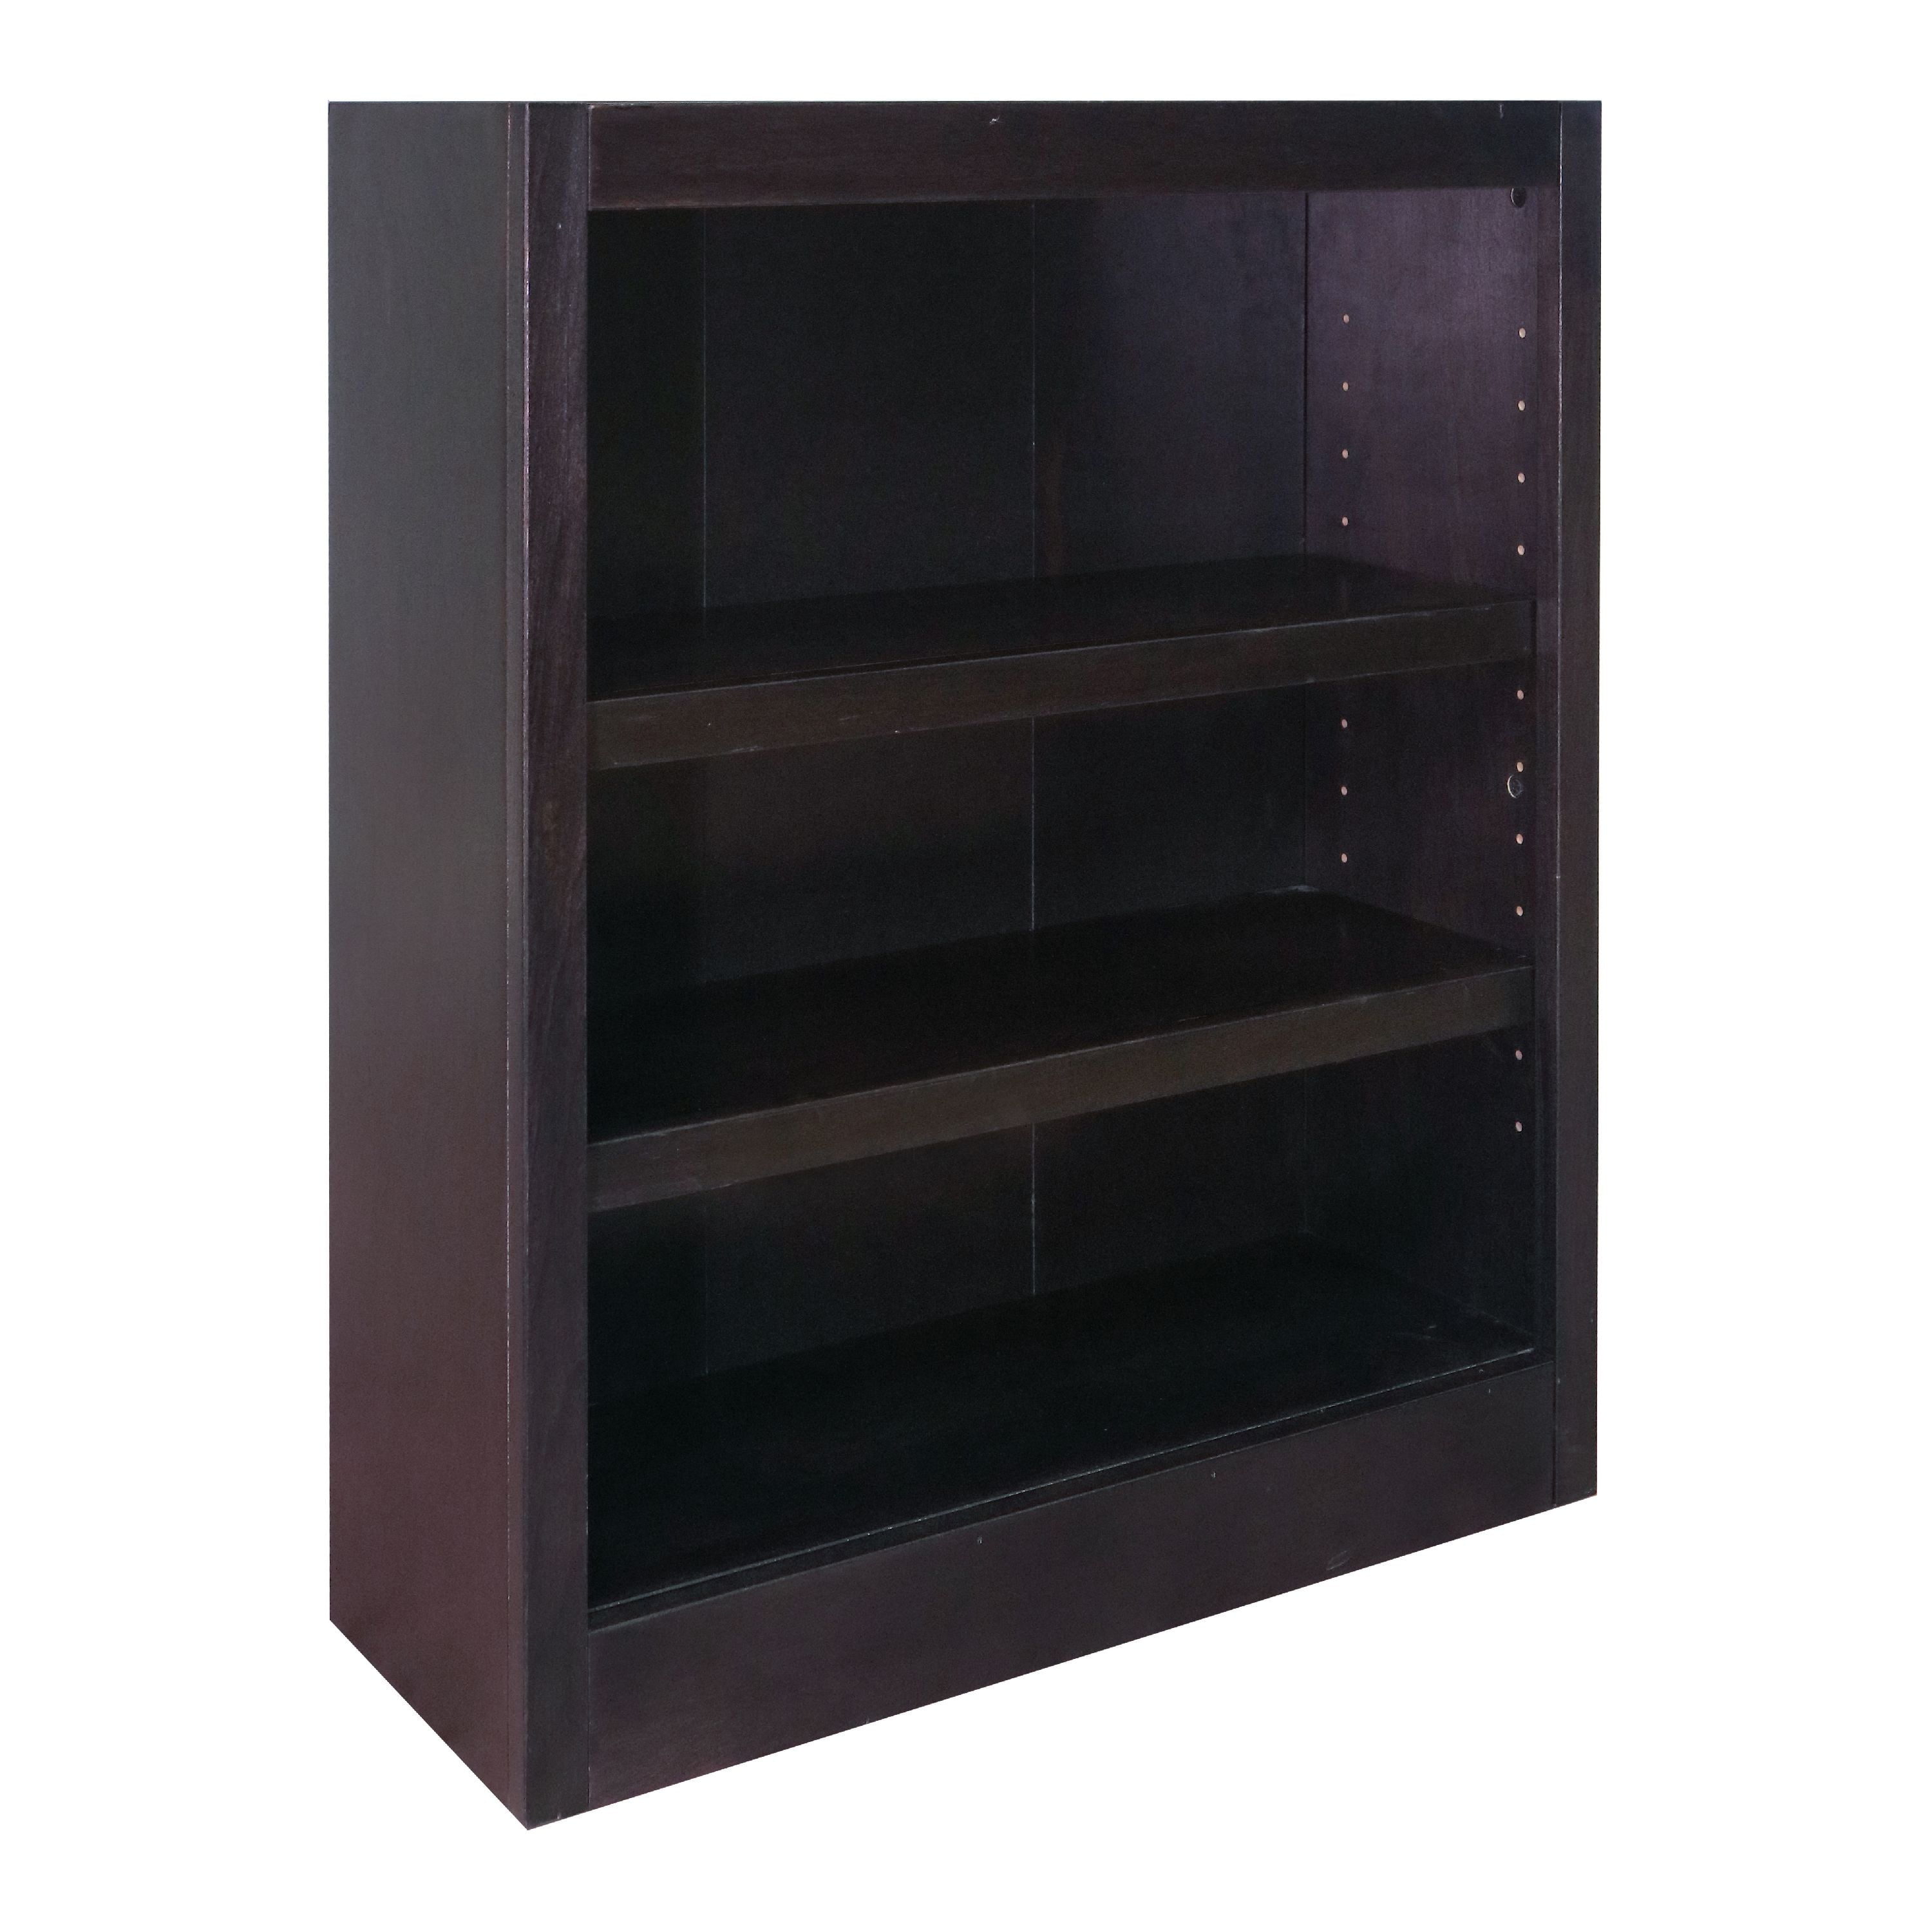 Concepts In Wood 3 Shelf Bookcase, 36 Wide Bookcase With Doors